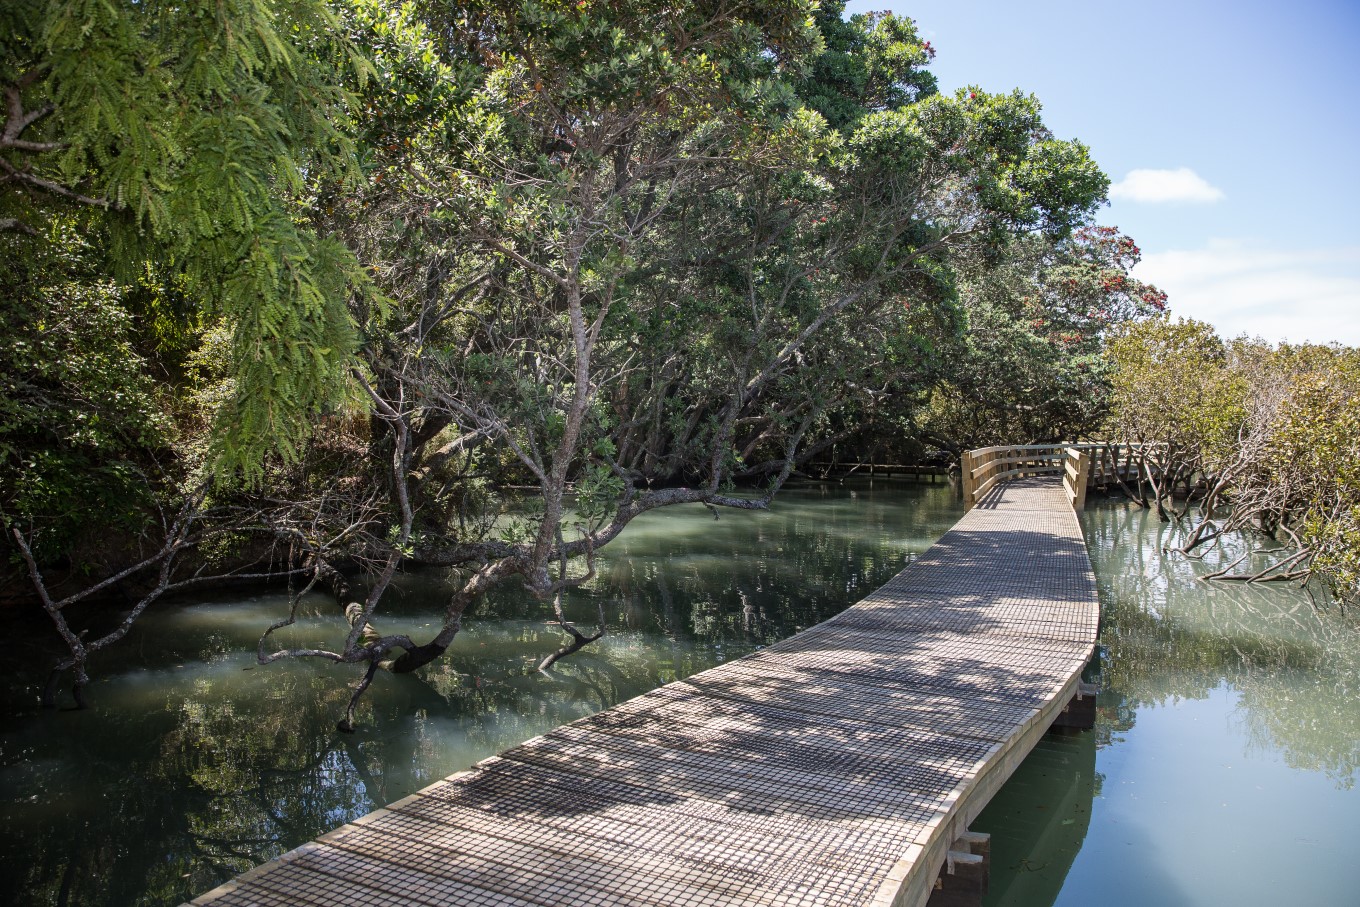 At high tide the Weona-Westmere Path makes you feel like you’re floating above the mangroves.